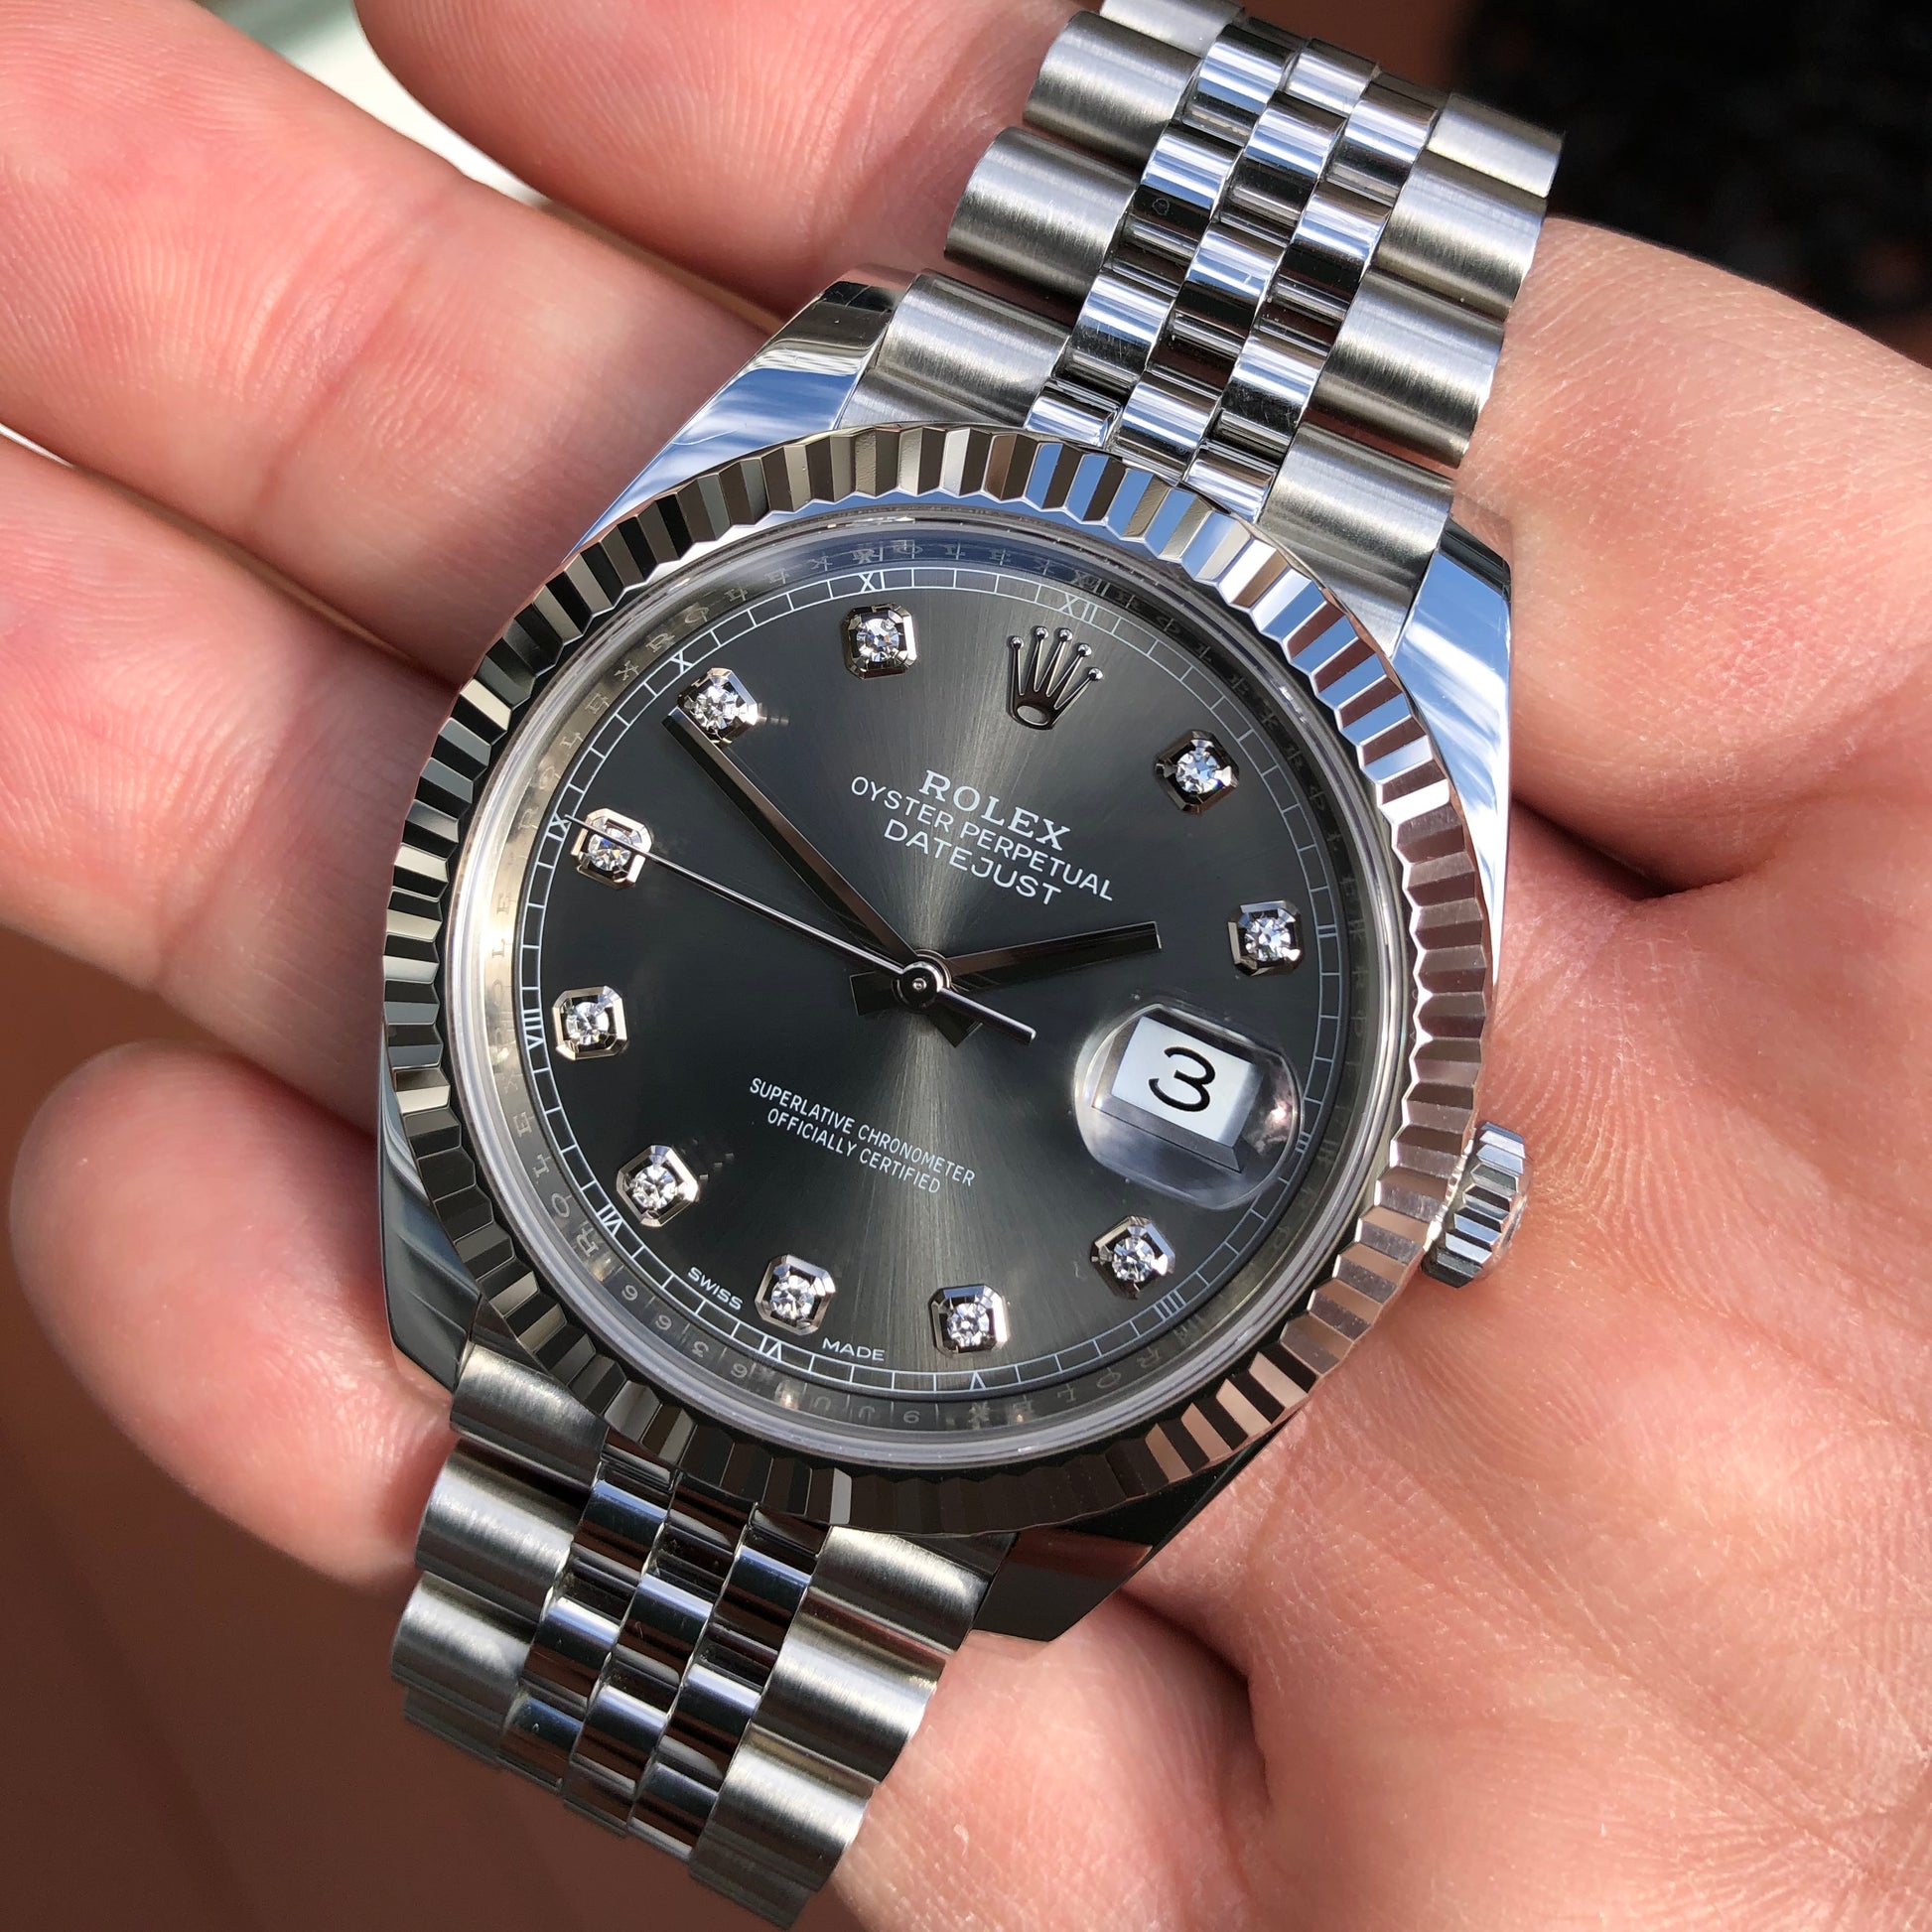 2018 Rolex Datejust 126334 Rhodium Diamond Fluted 41mm Steel Jubilee Wristwatch with Box and Papers - Hashtag Watch Company